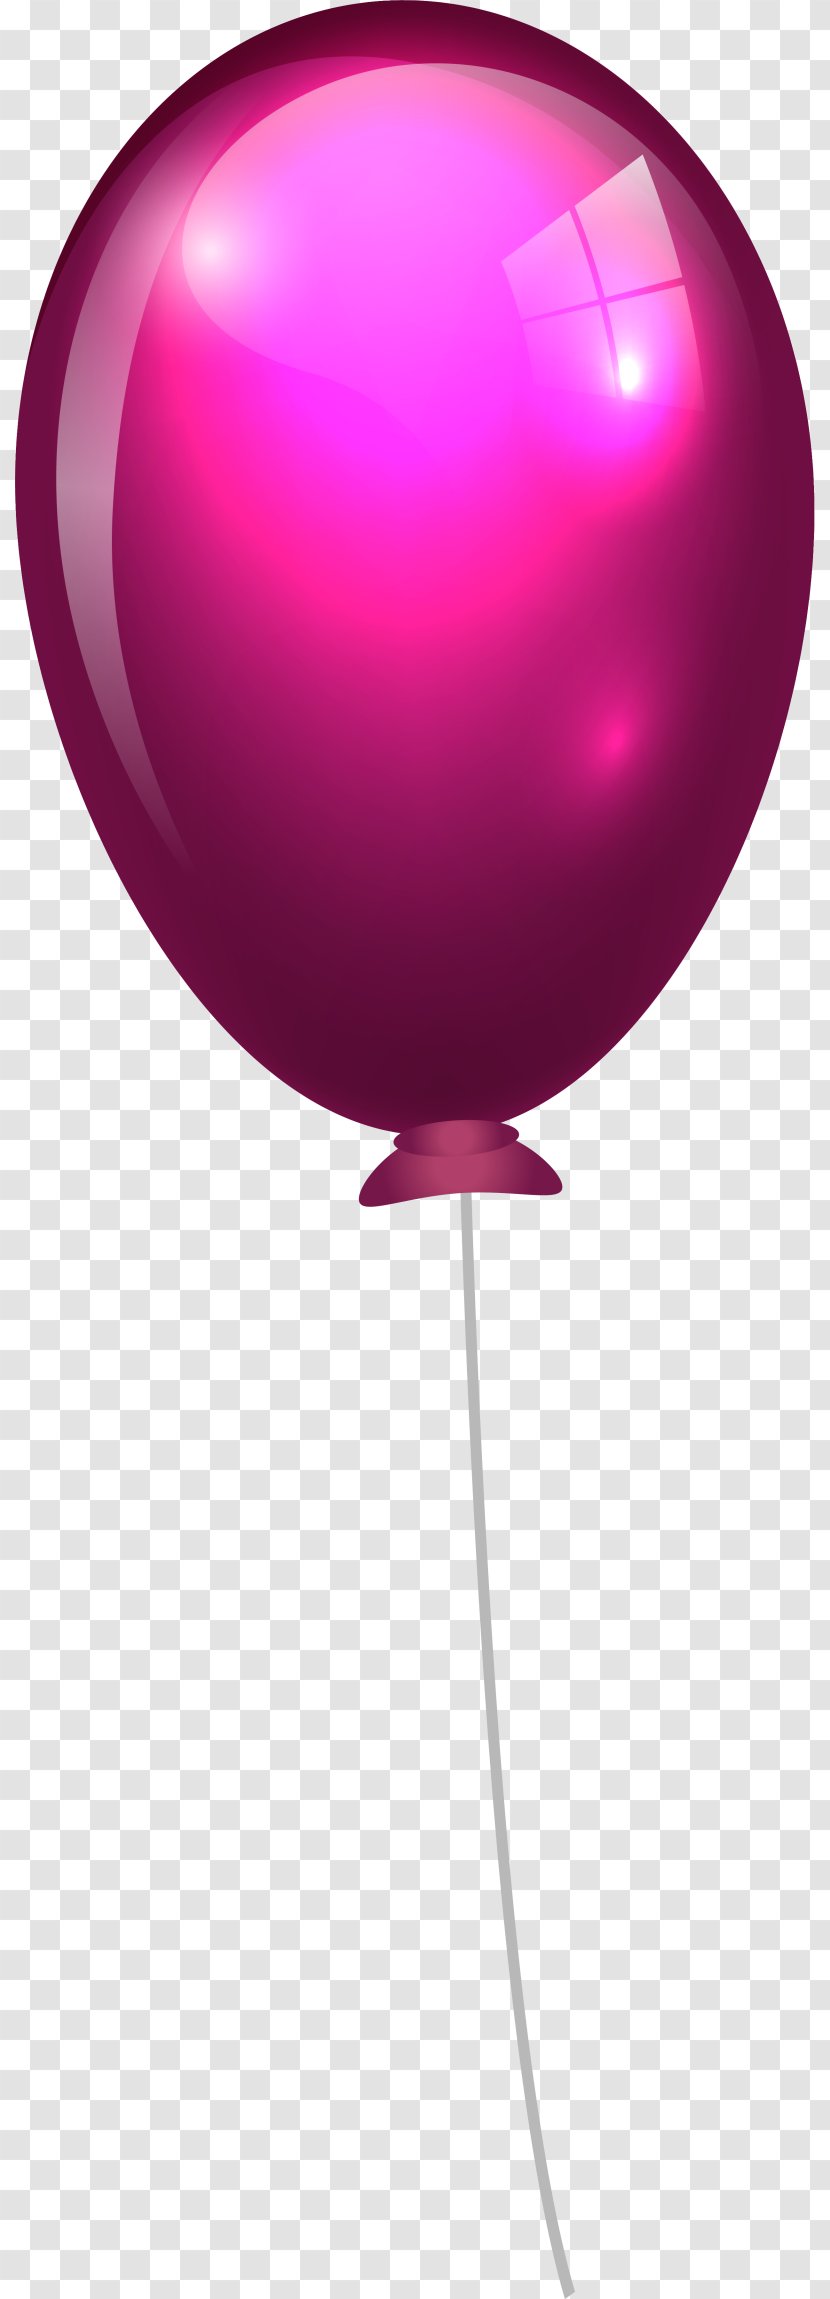 Balloon Rope Purple - Hand Painted Transparent PNG